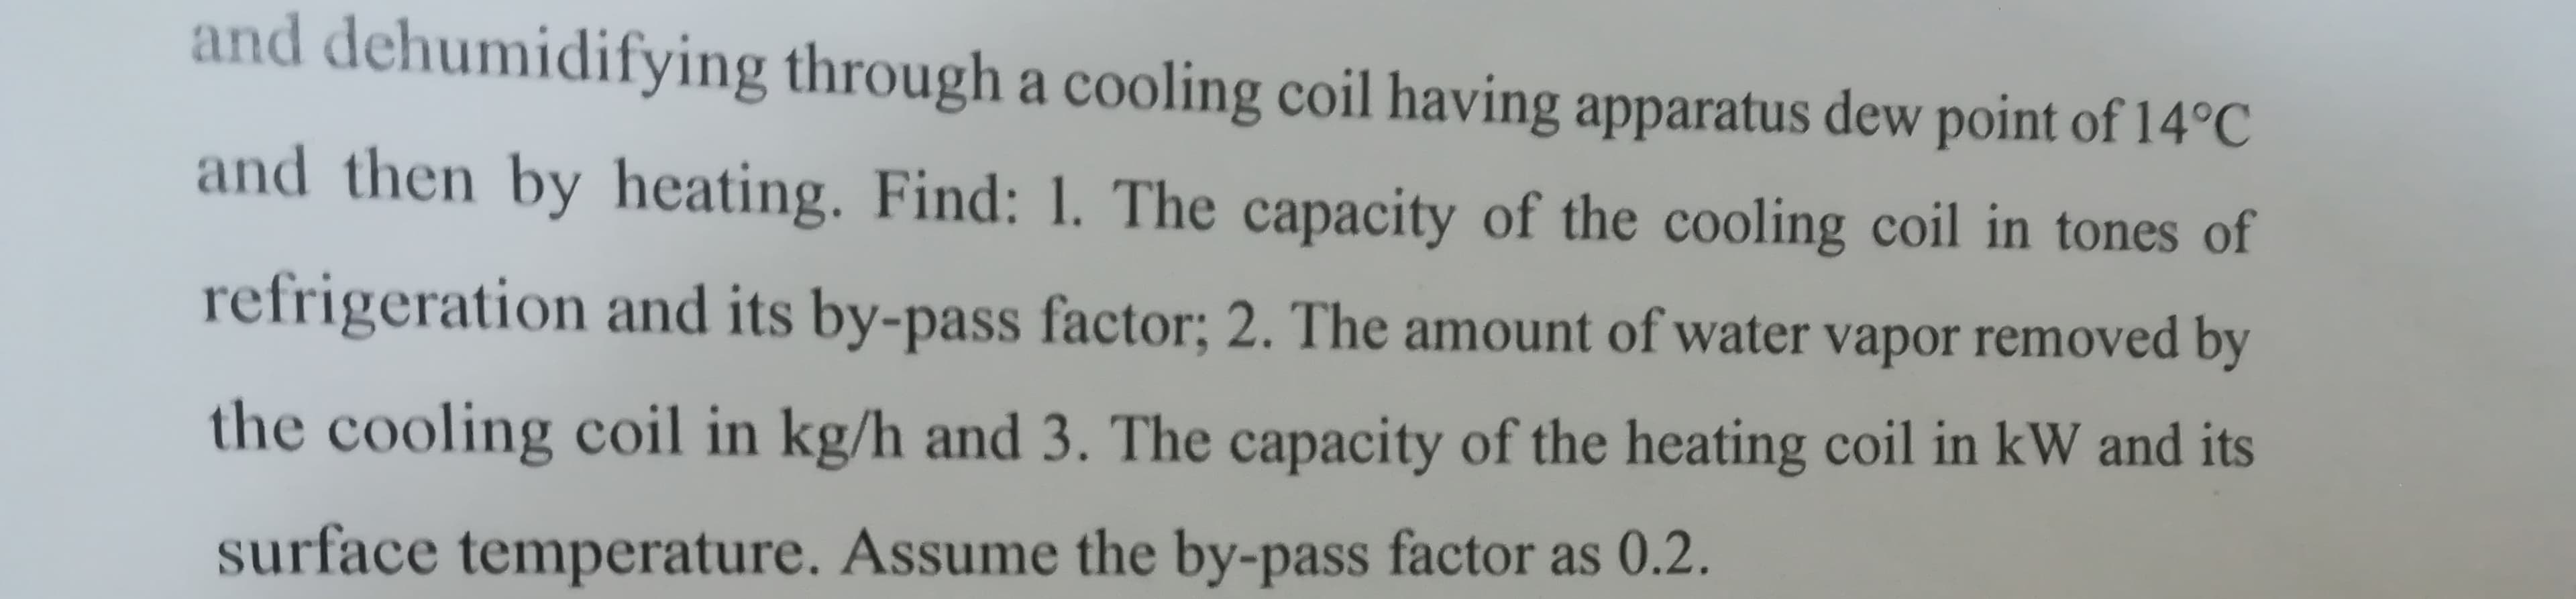 and dehumidifying through a cooling coil having apparatus dew point of 14°C
and then by heating. Find: 1. The capacity of the cooling coil in tones of
refrigeration and its by-pass factor; 2. The amount of water vapor removed by
the cooling coil in kg/h and 3. The capacity of the heating coil in kW and its
surface temperature, Assume the by-pass facto as 0 2
